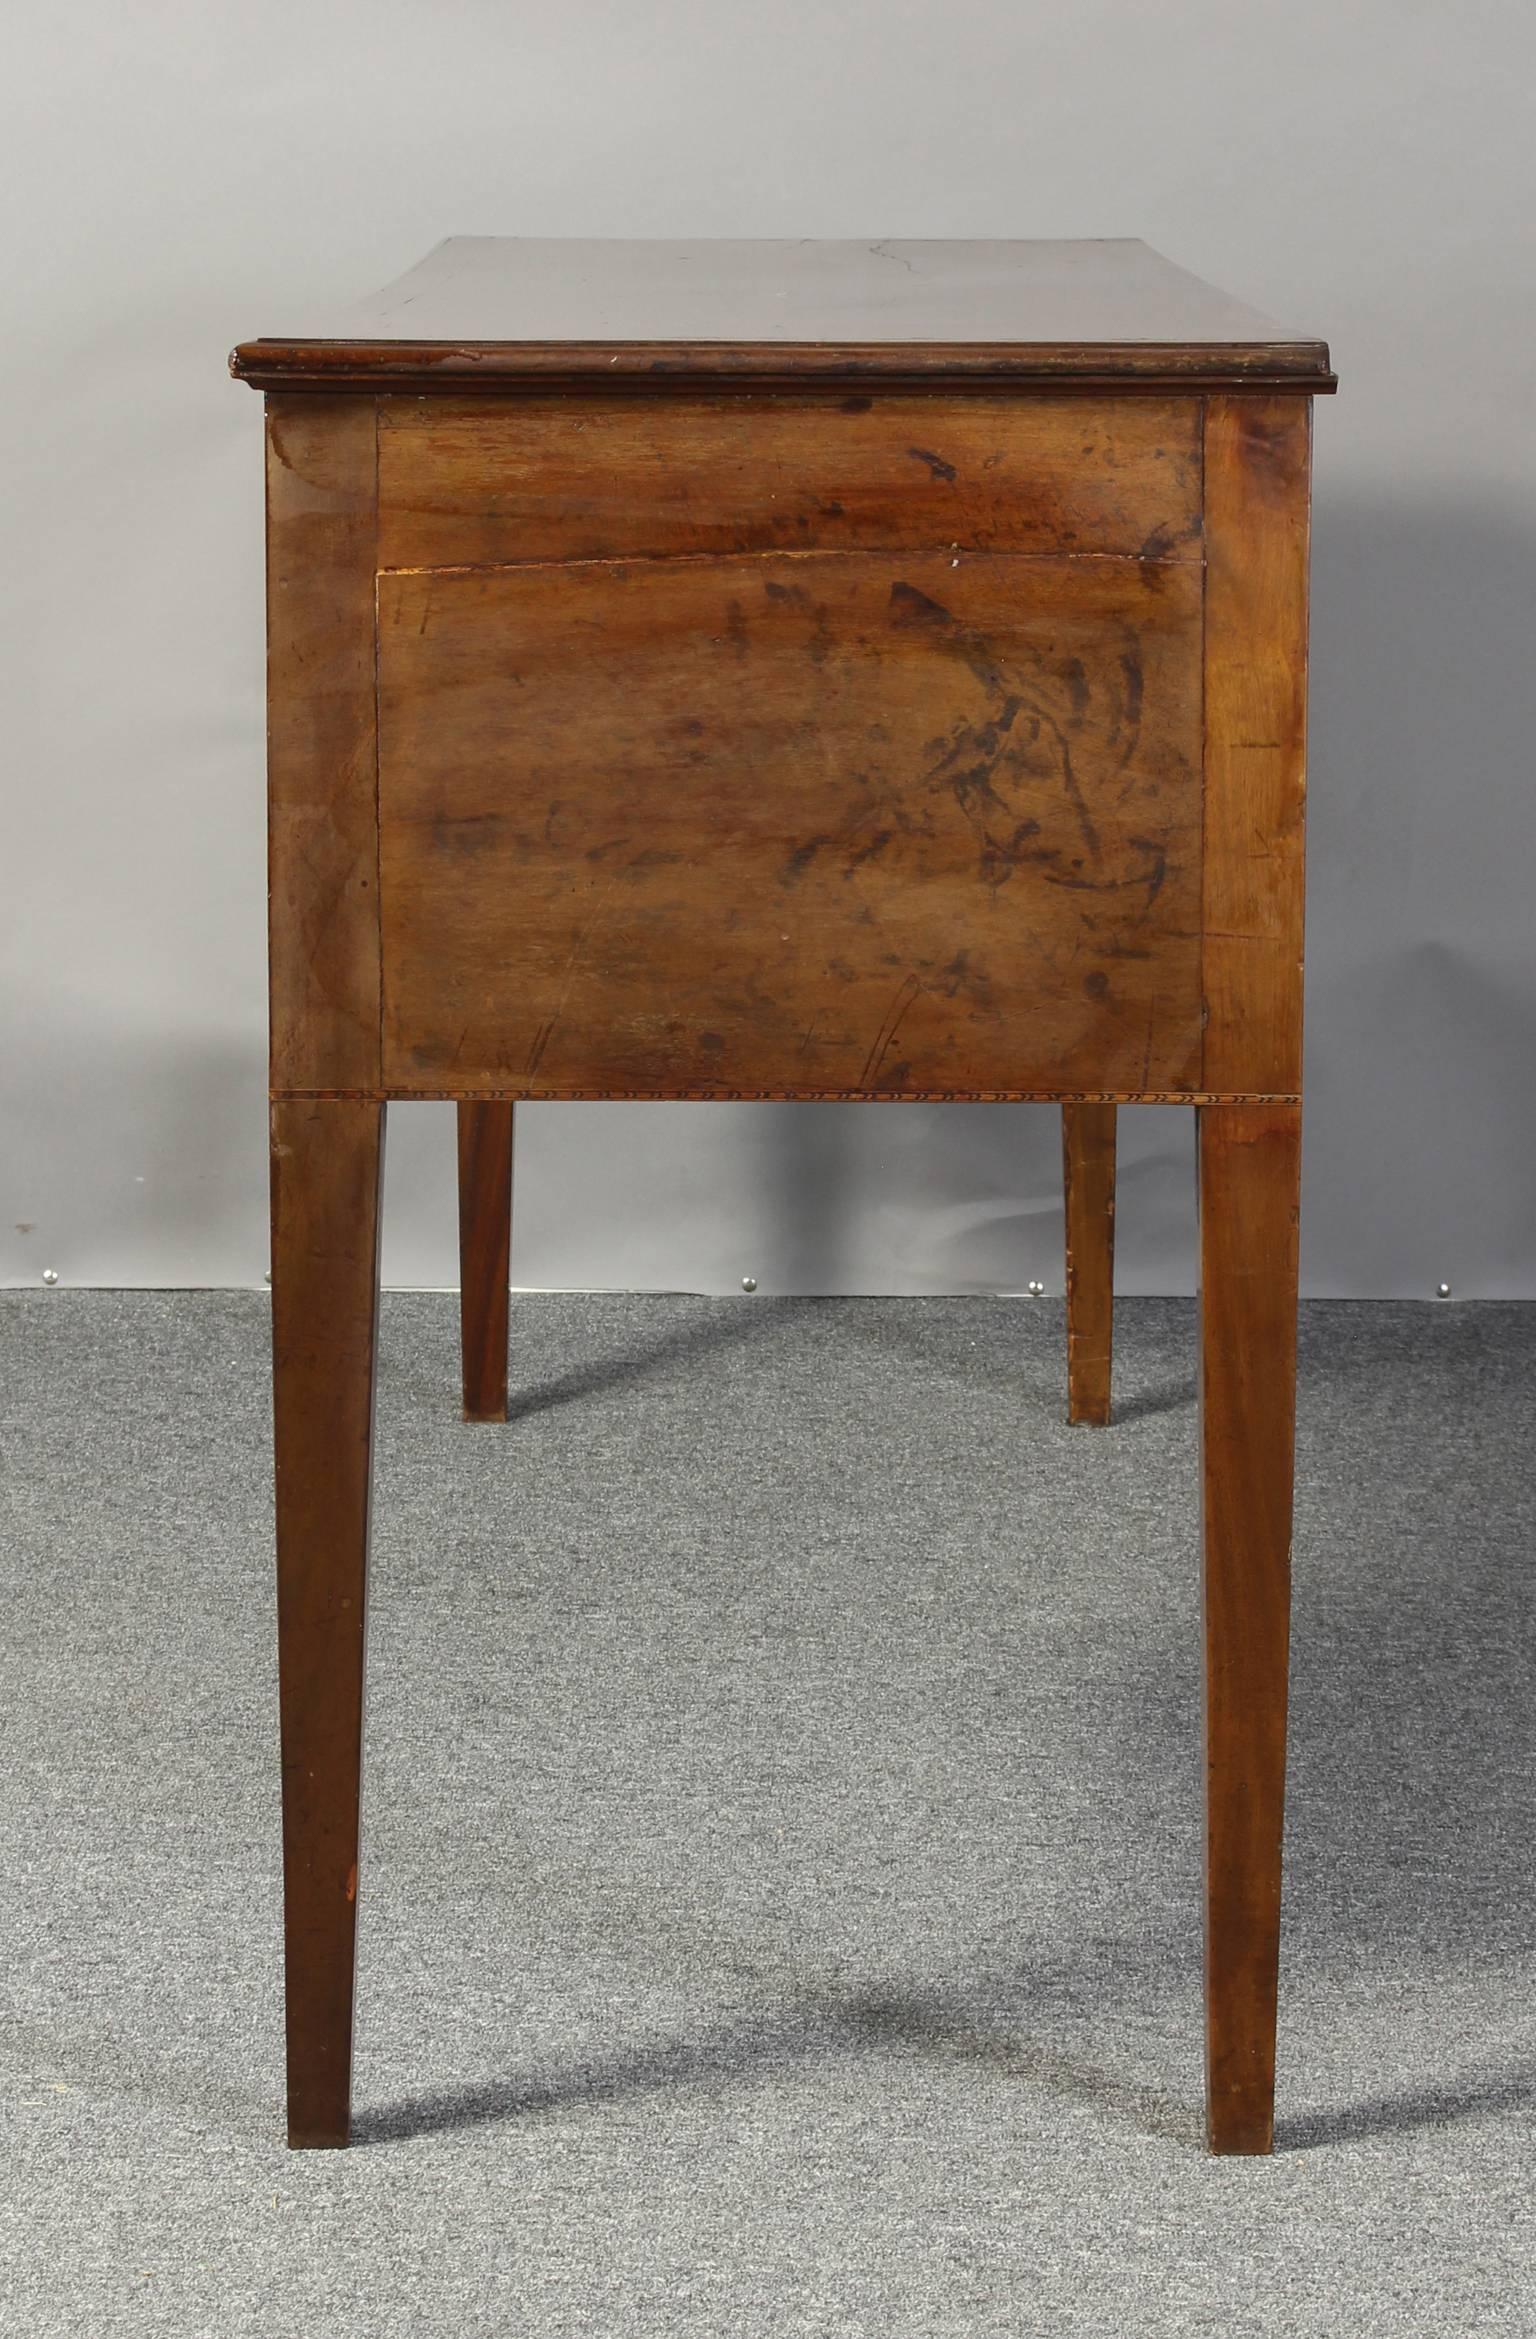 George III 19th Century English Mahogany Console Table or Server